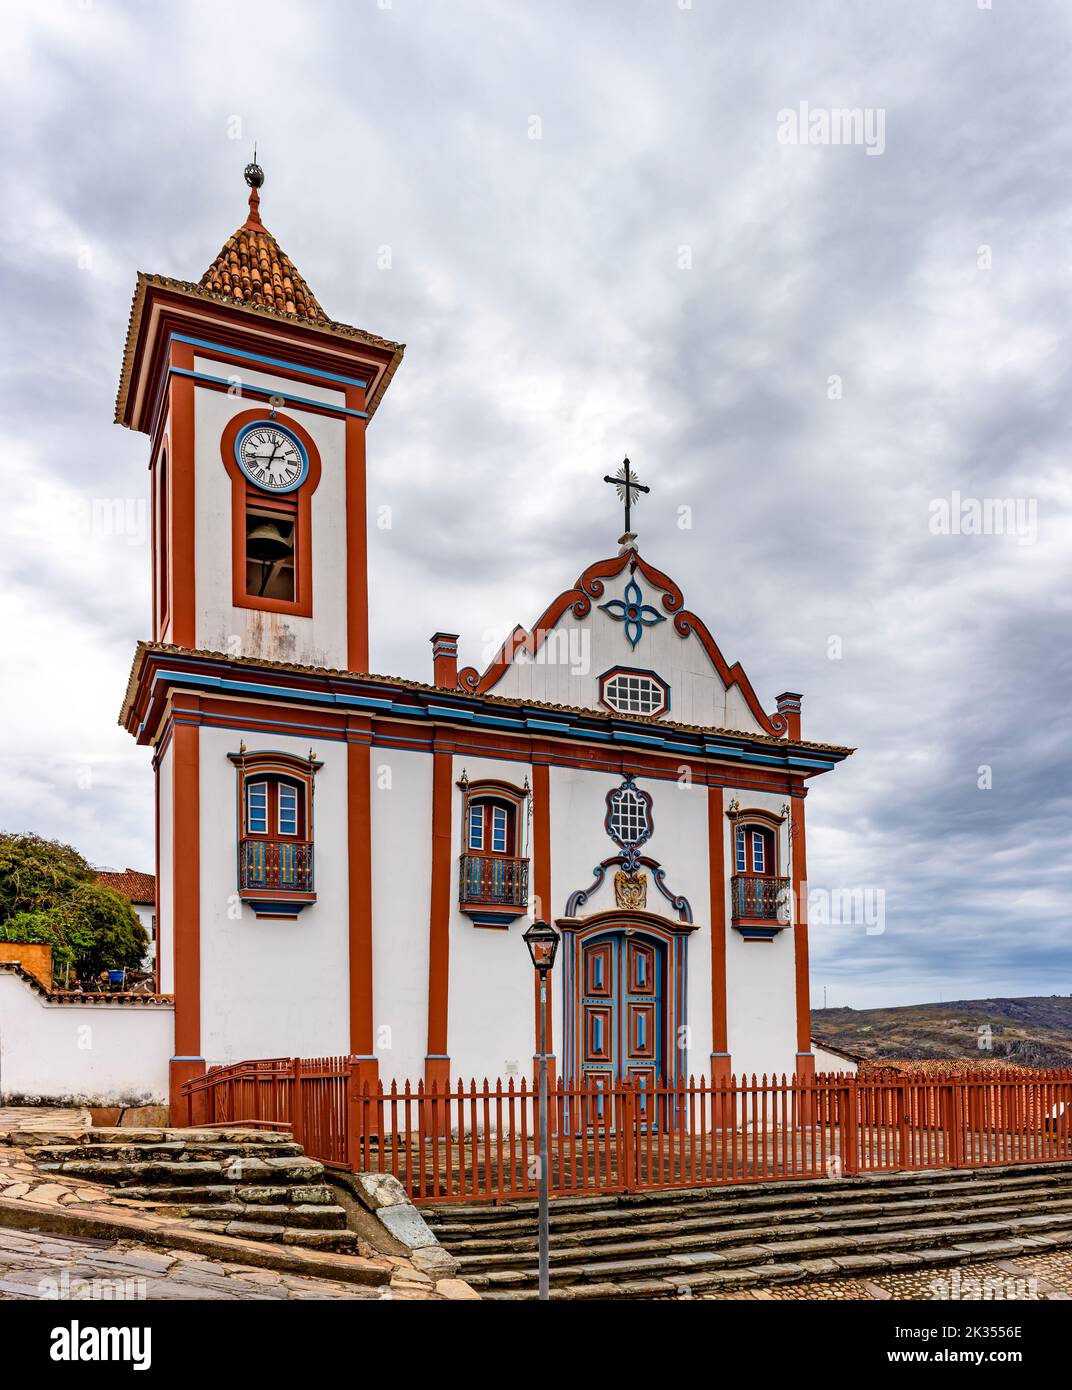 Old baroque style church in the historic town of Diamantina on a cloudy day Stock Photo